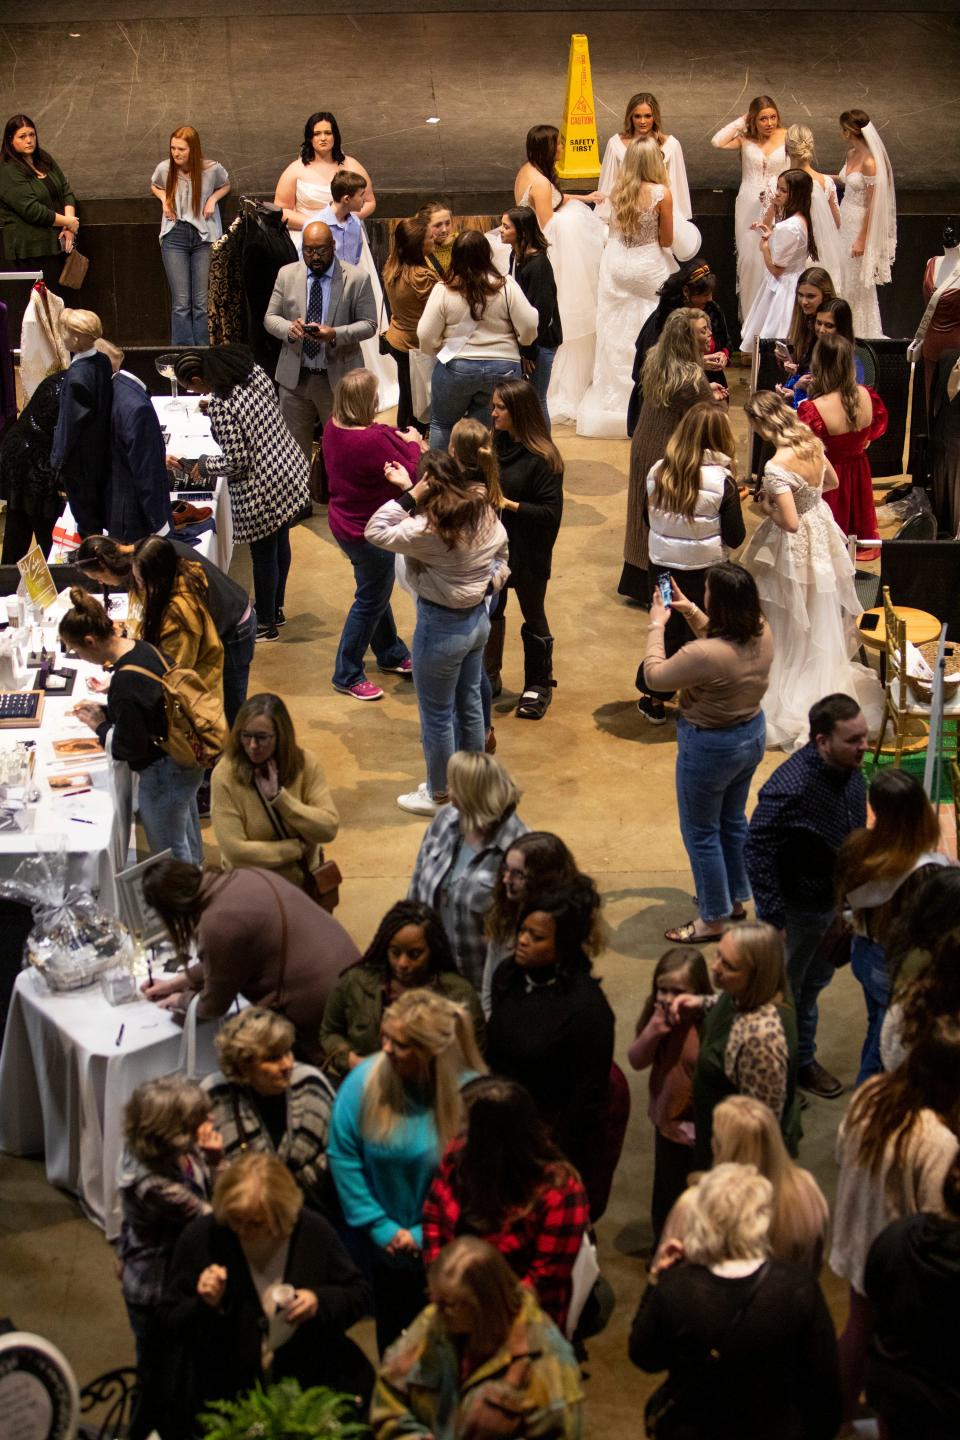 Attendees take photos and look at vendors’ booths as models show off different wedding dresses from My Best Friend Jenna during the Jackson Bridal Show at the Carl Perkins Civic Center on Sunday, January 8, 2023, in Jackson, Tenn. 